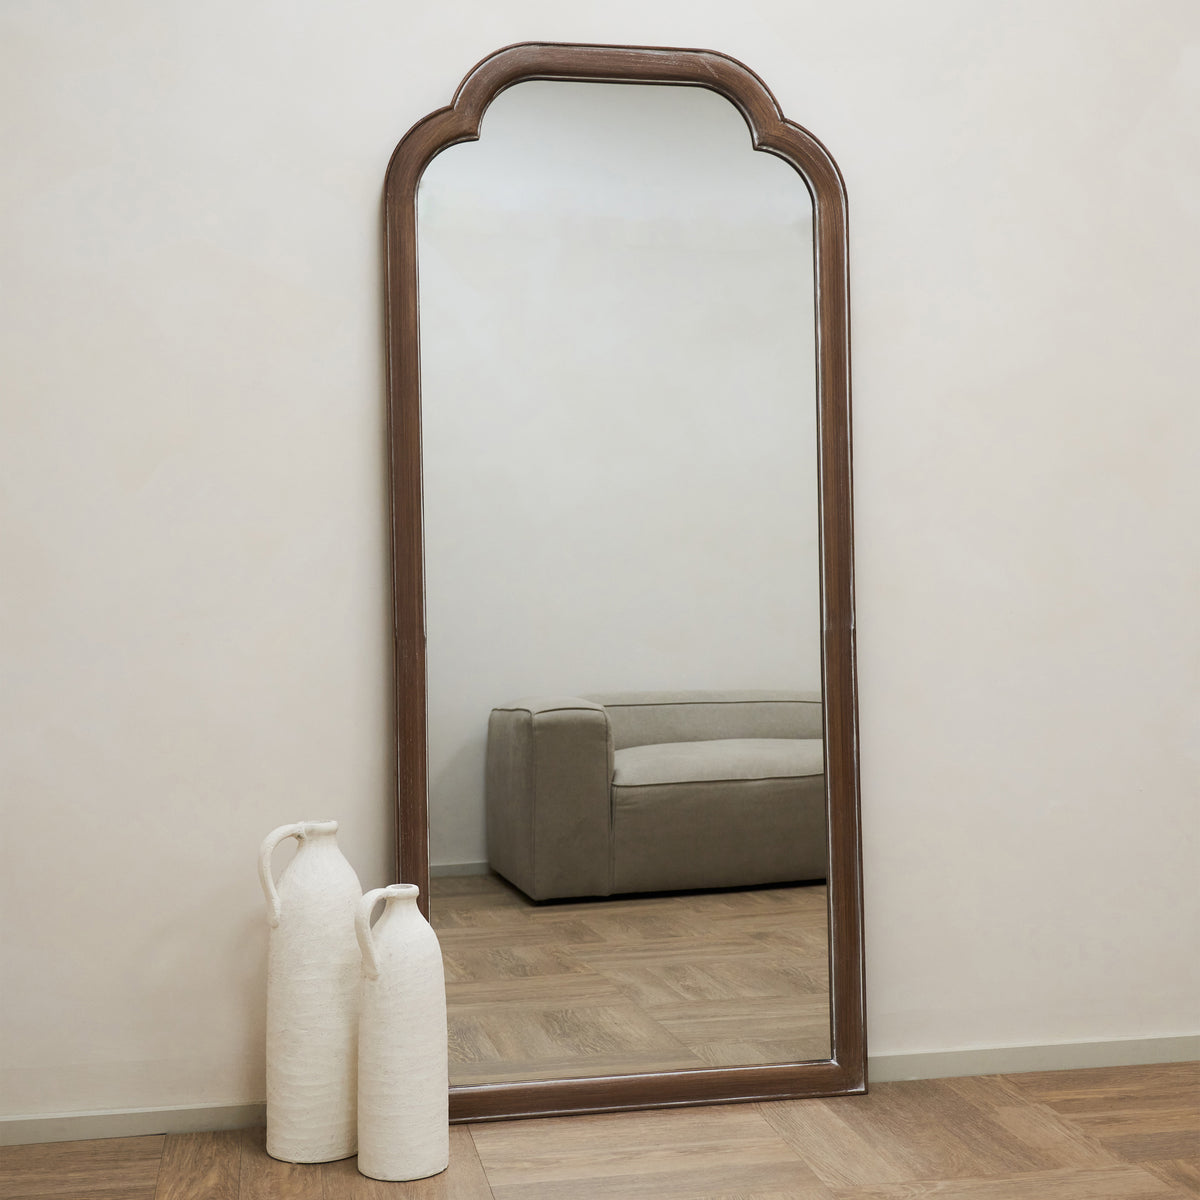 Full Length Washed Wood Arched Mirror beside ceramics